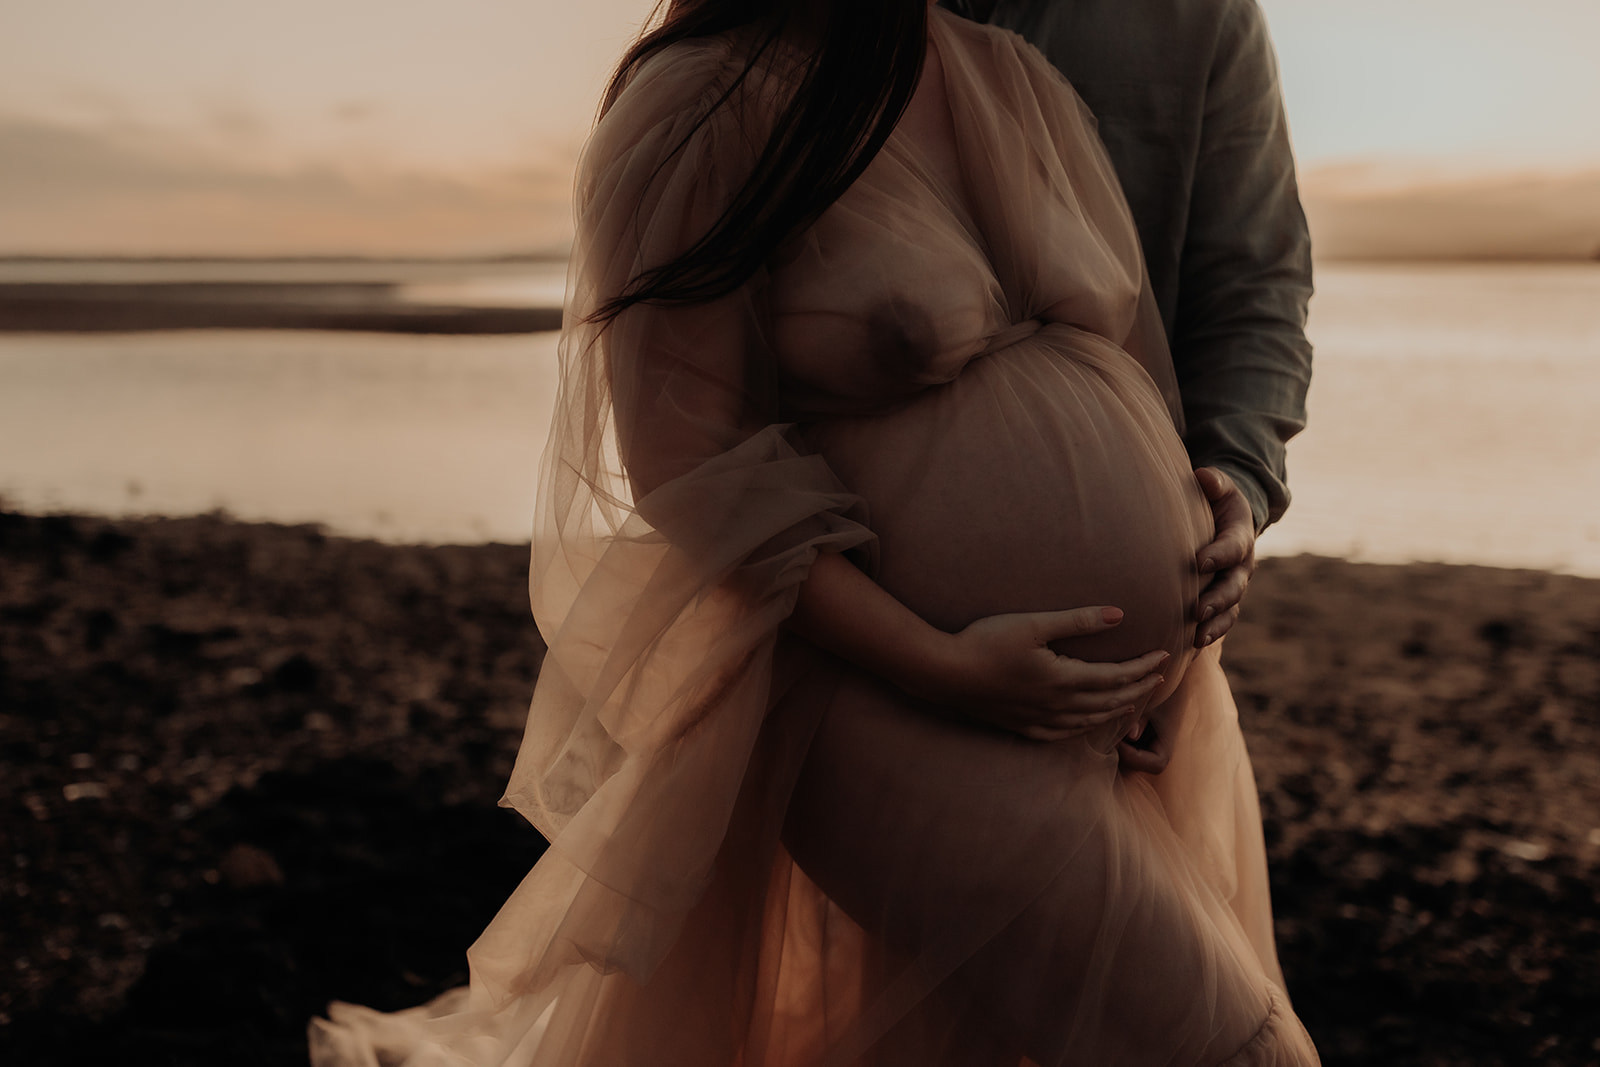 A man stands behind his pregnant partner and they both cup her belly with their hands.  Sunset over bay behind them. 